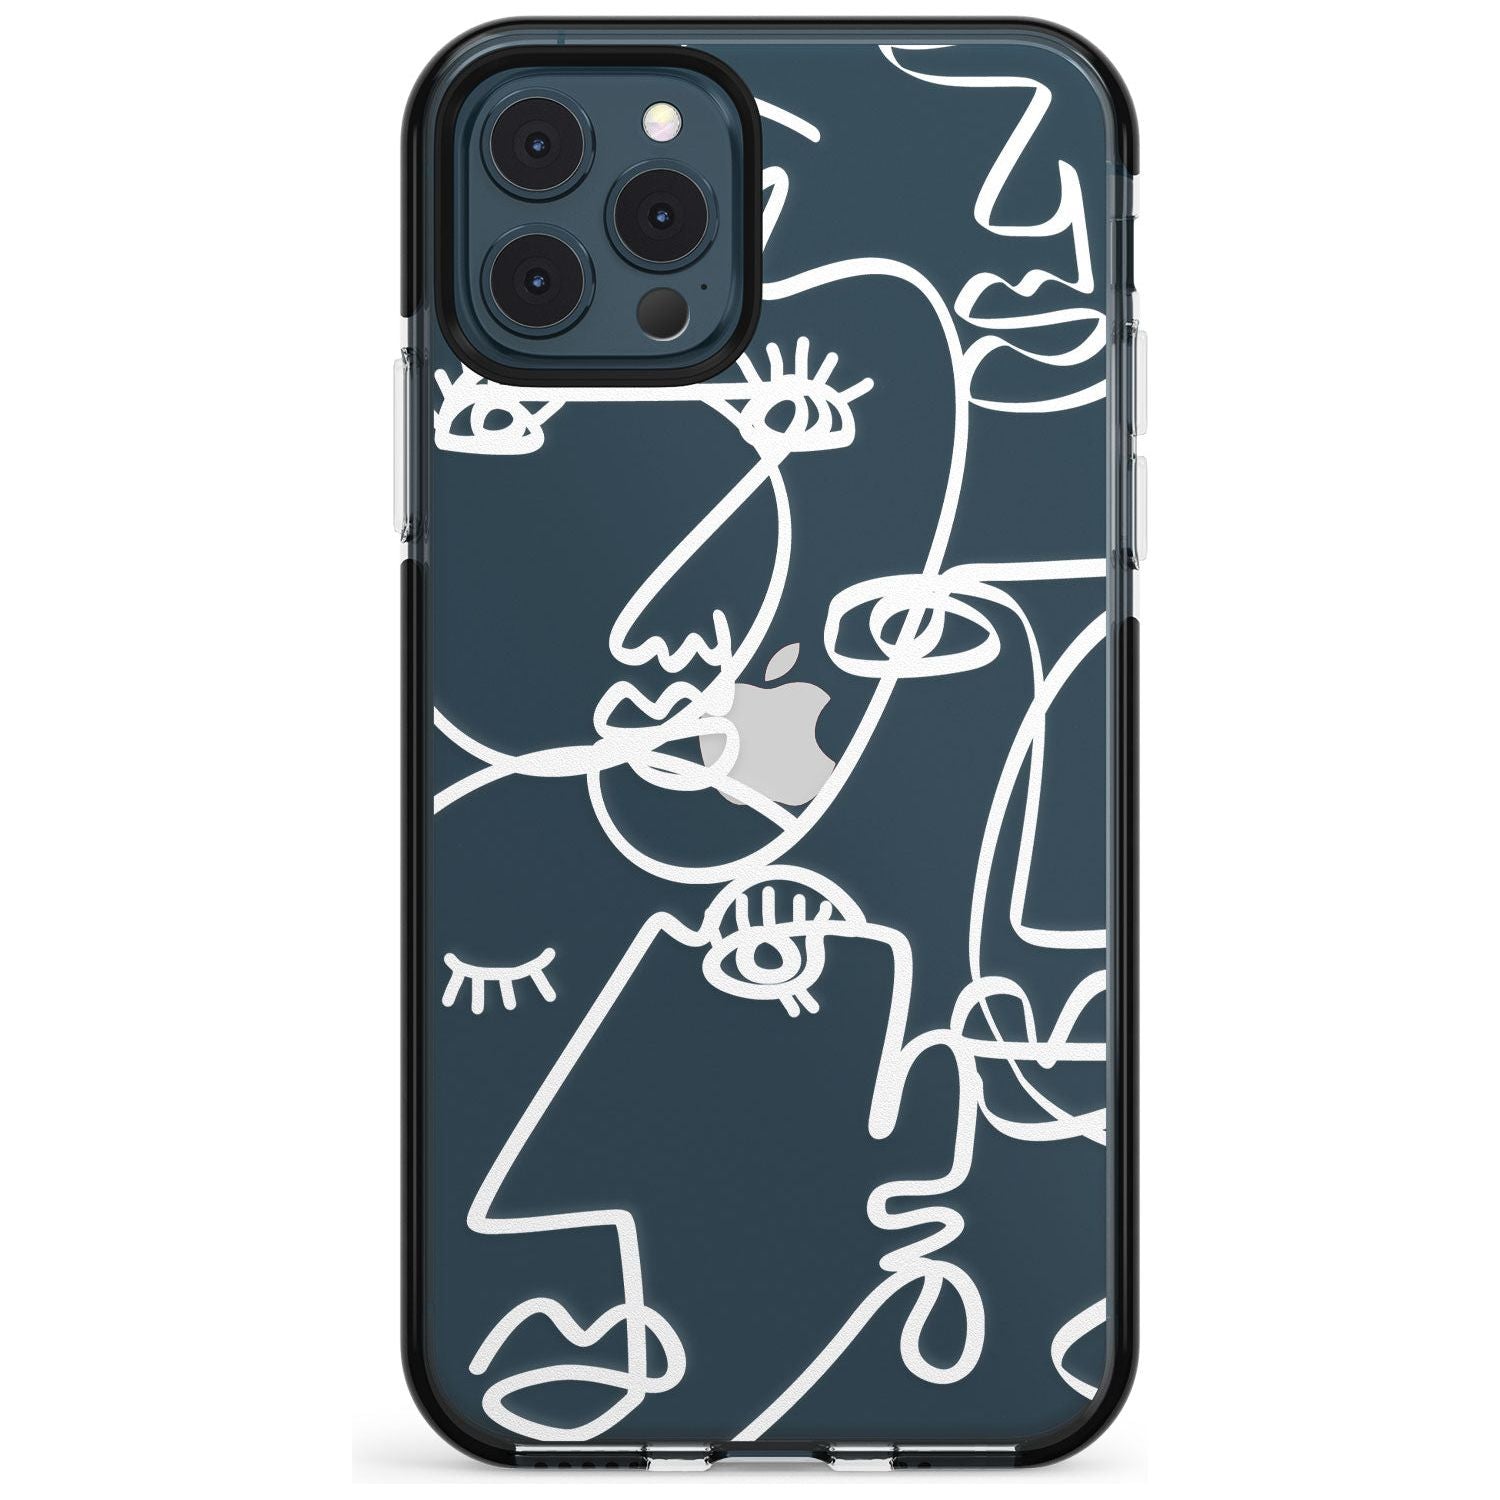 Continuous Line Faces: White on Clear Pink Fade Impact Phone Case for iPhone 11